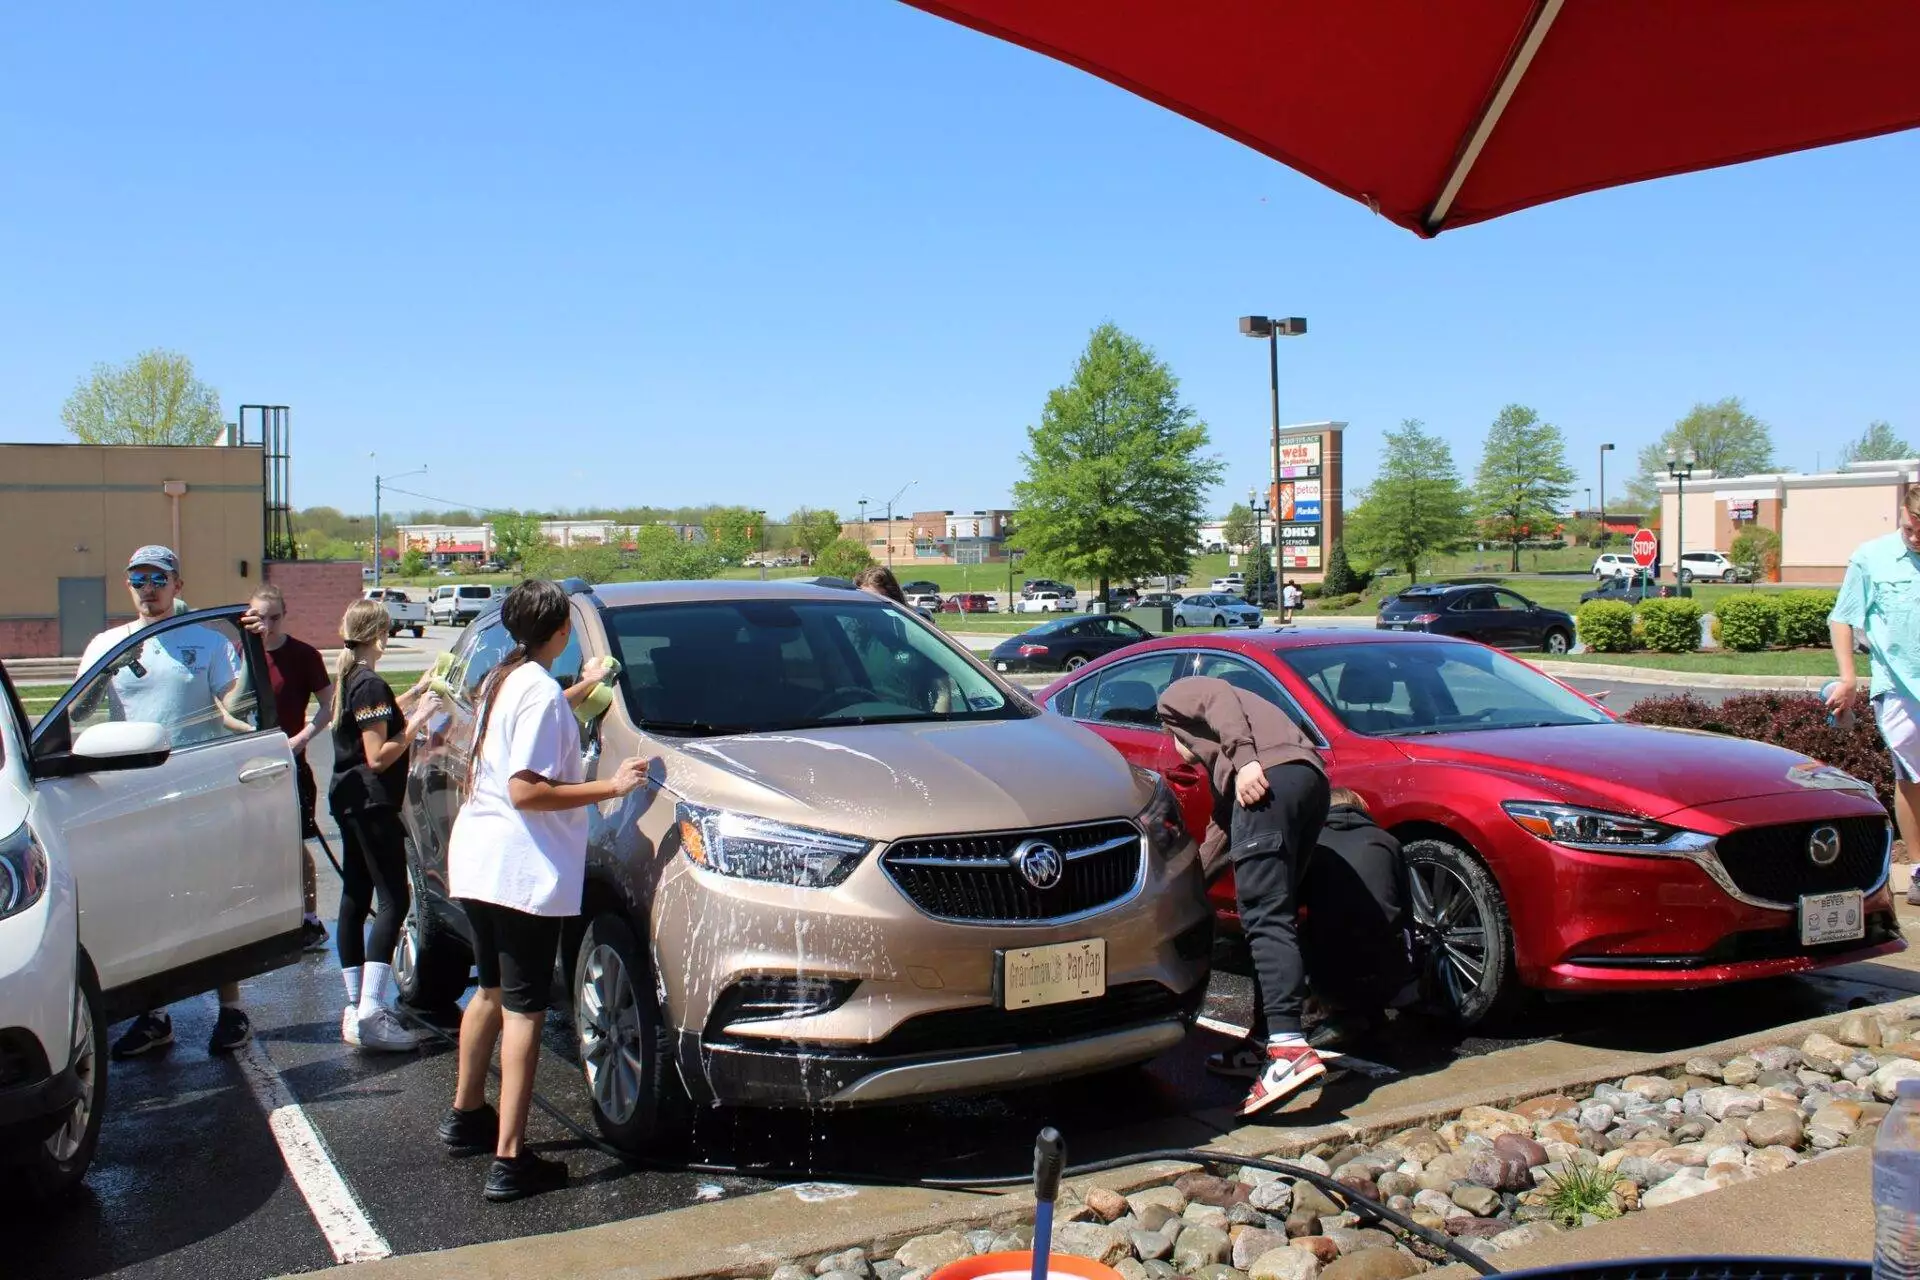 A group of people washing cars in a sunny parking lot, including a tan sedan and a red sports car.